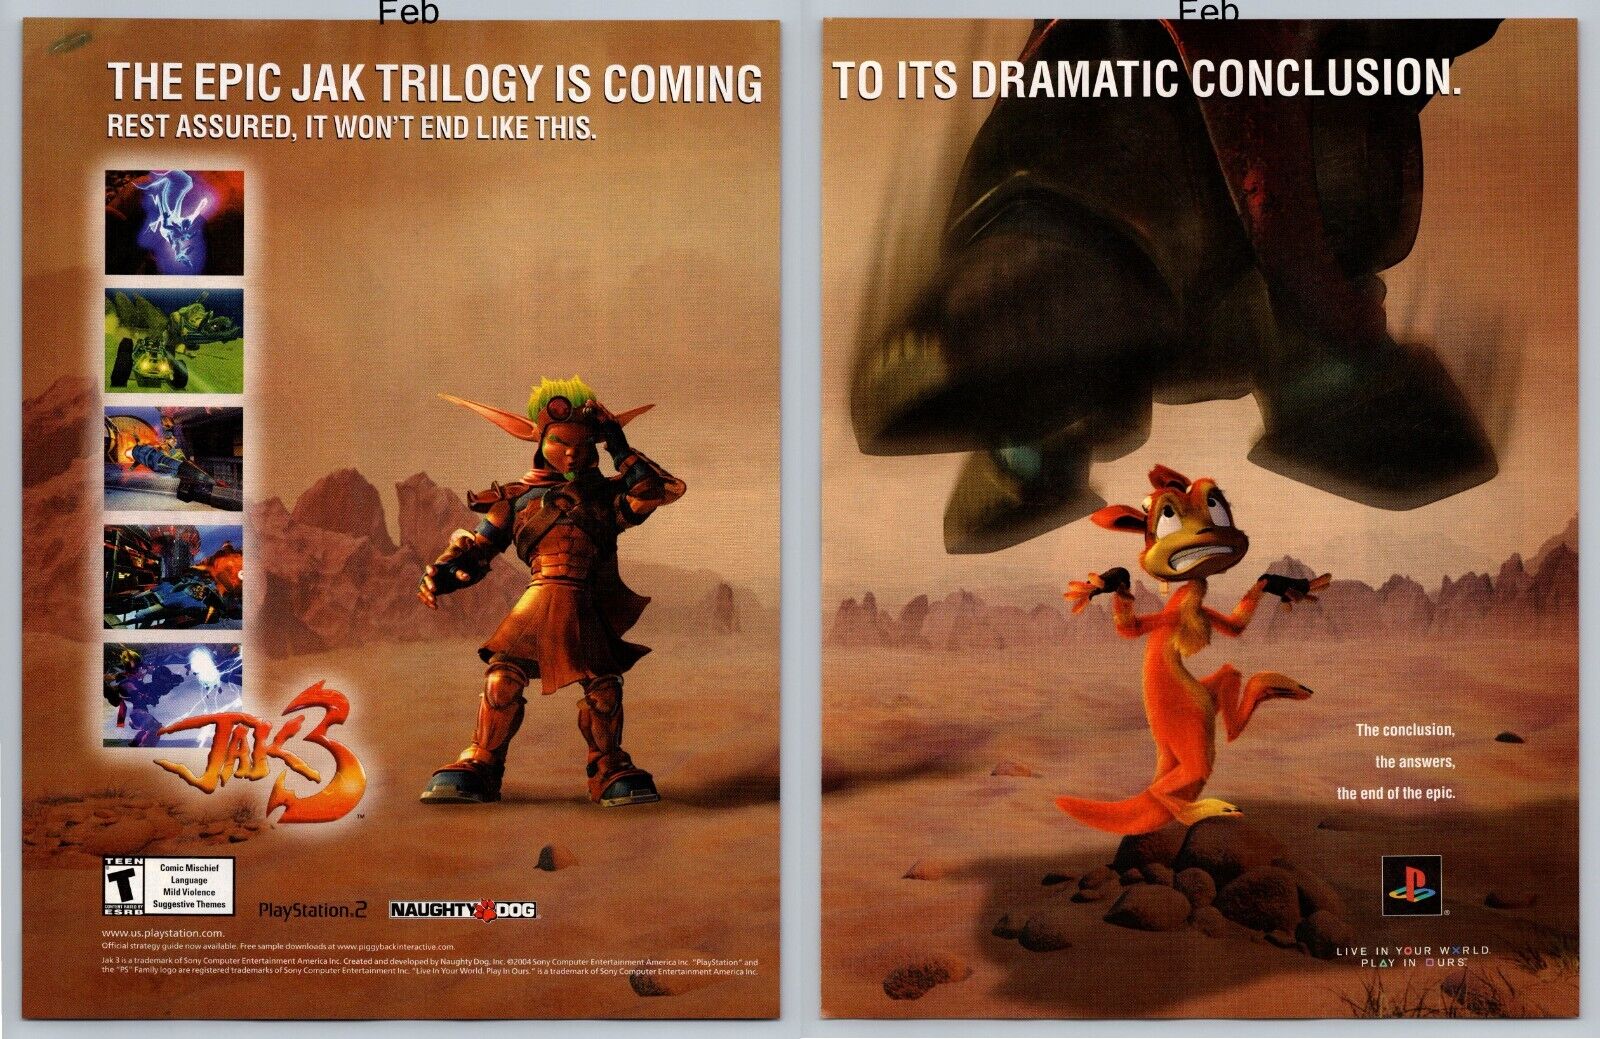 Jak 3 Playstation 2 PS2 Naughty Dog Game Promo 2005 Full 2 Page Print Ad